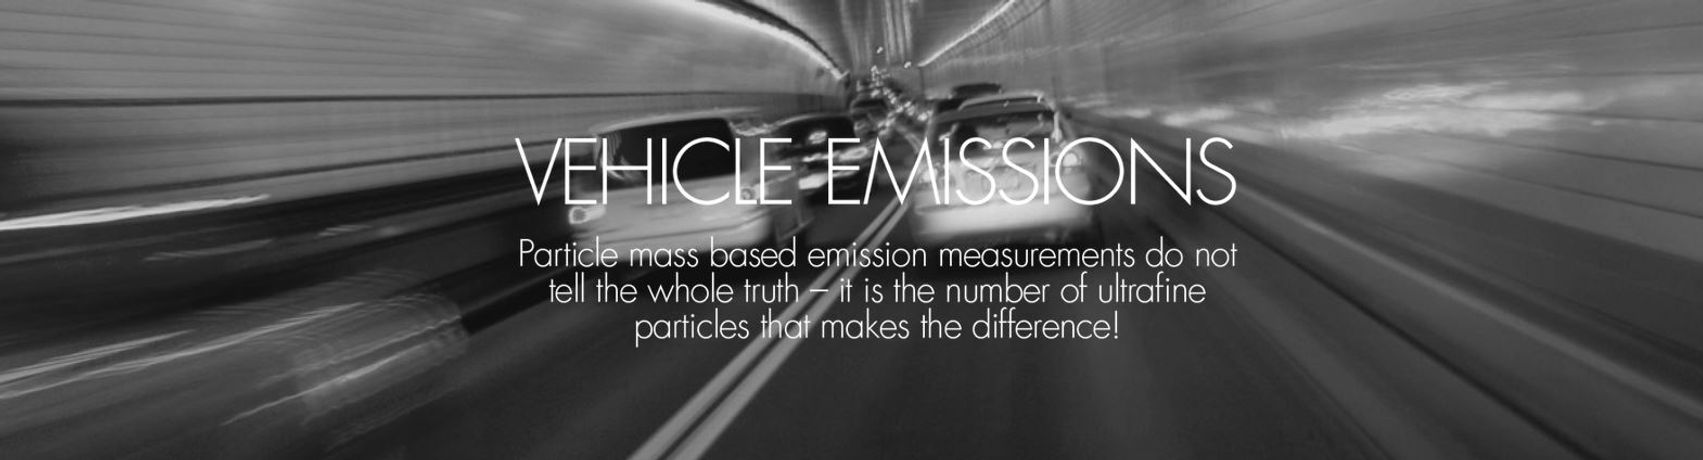 Aerosol Measurement Solutions for Vehicle Emissions - Air and Climate - Air Pollution Treatment